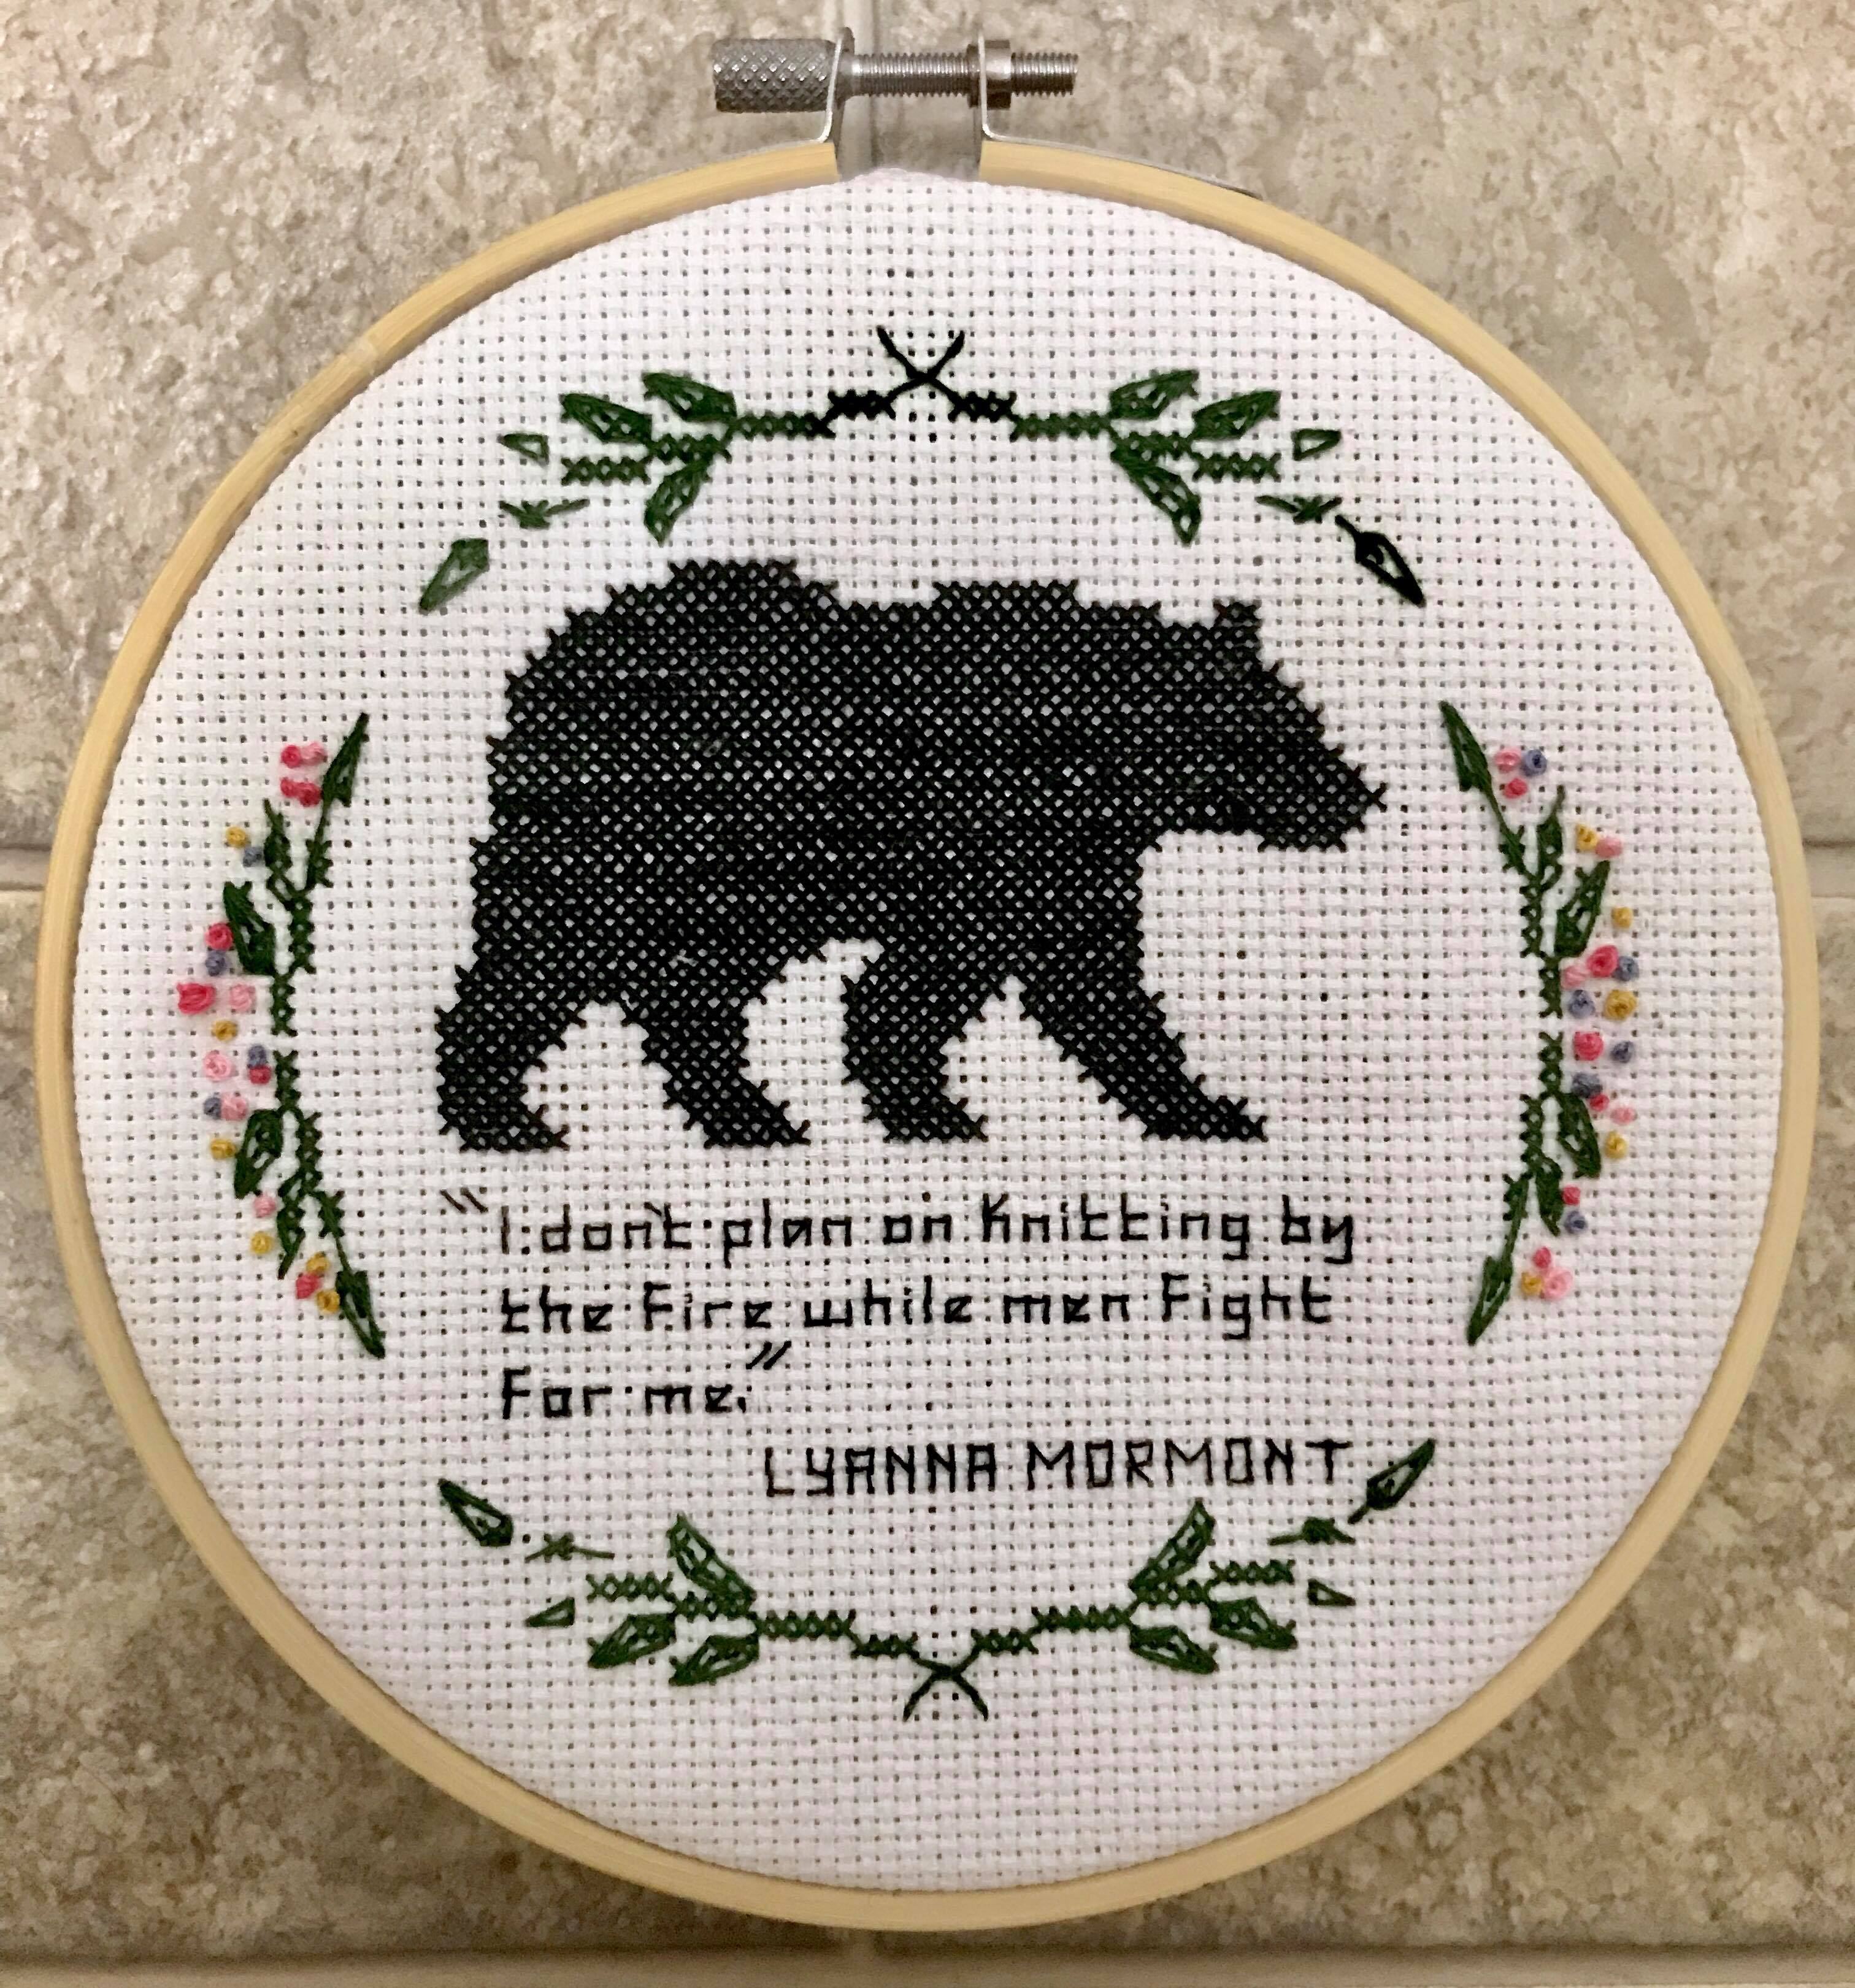 Game Of Thrones Embroidery Patterns Fo I Designed This In Honour Of One Of My Favourite Characters On